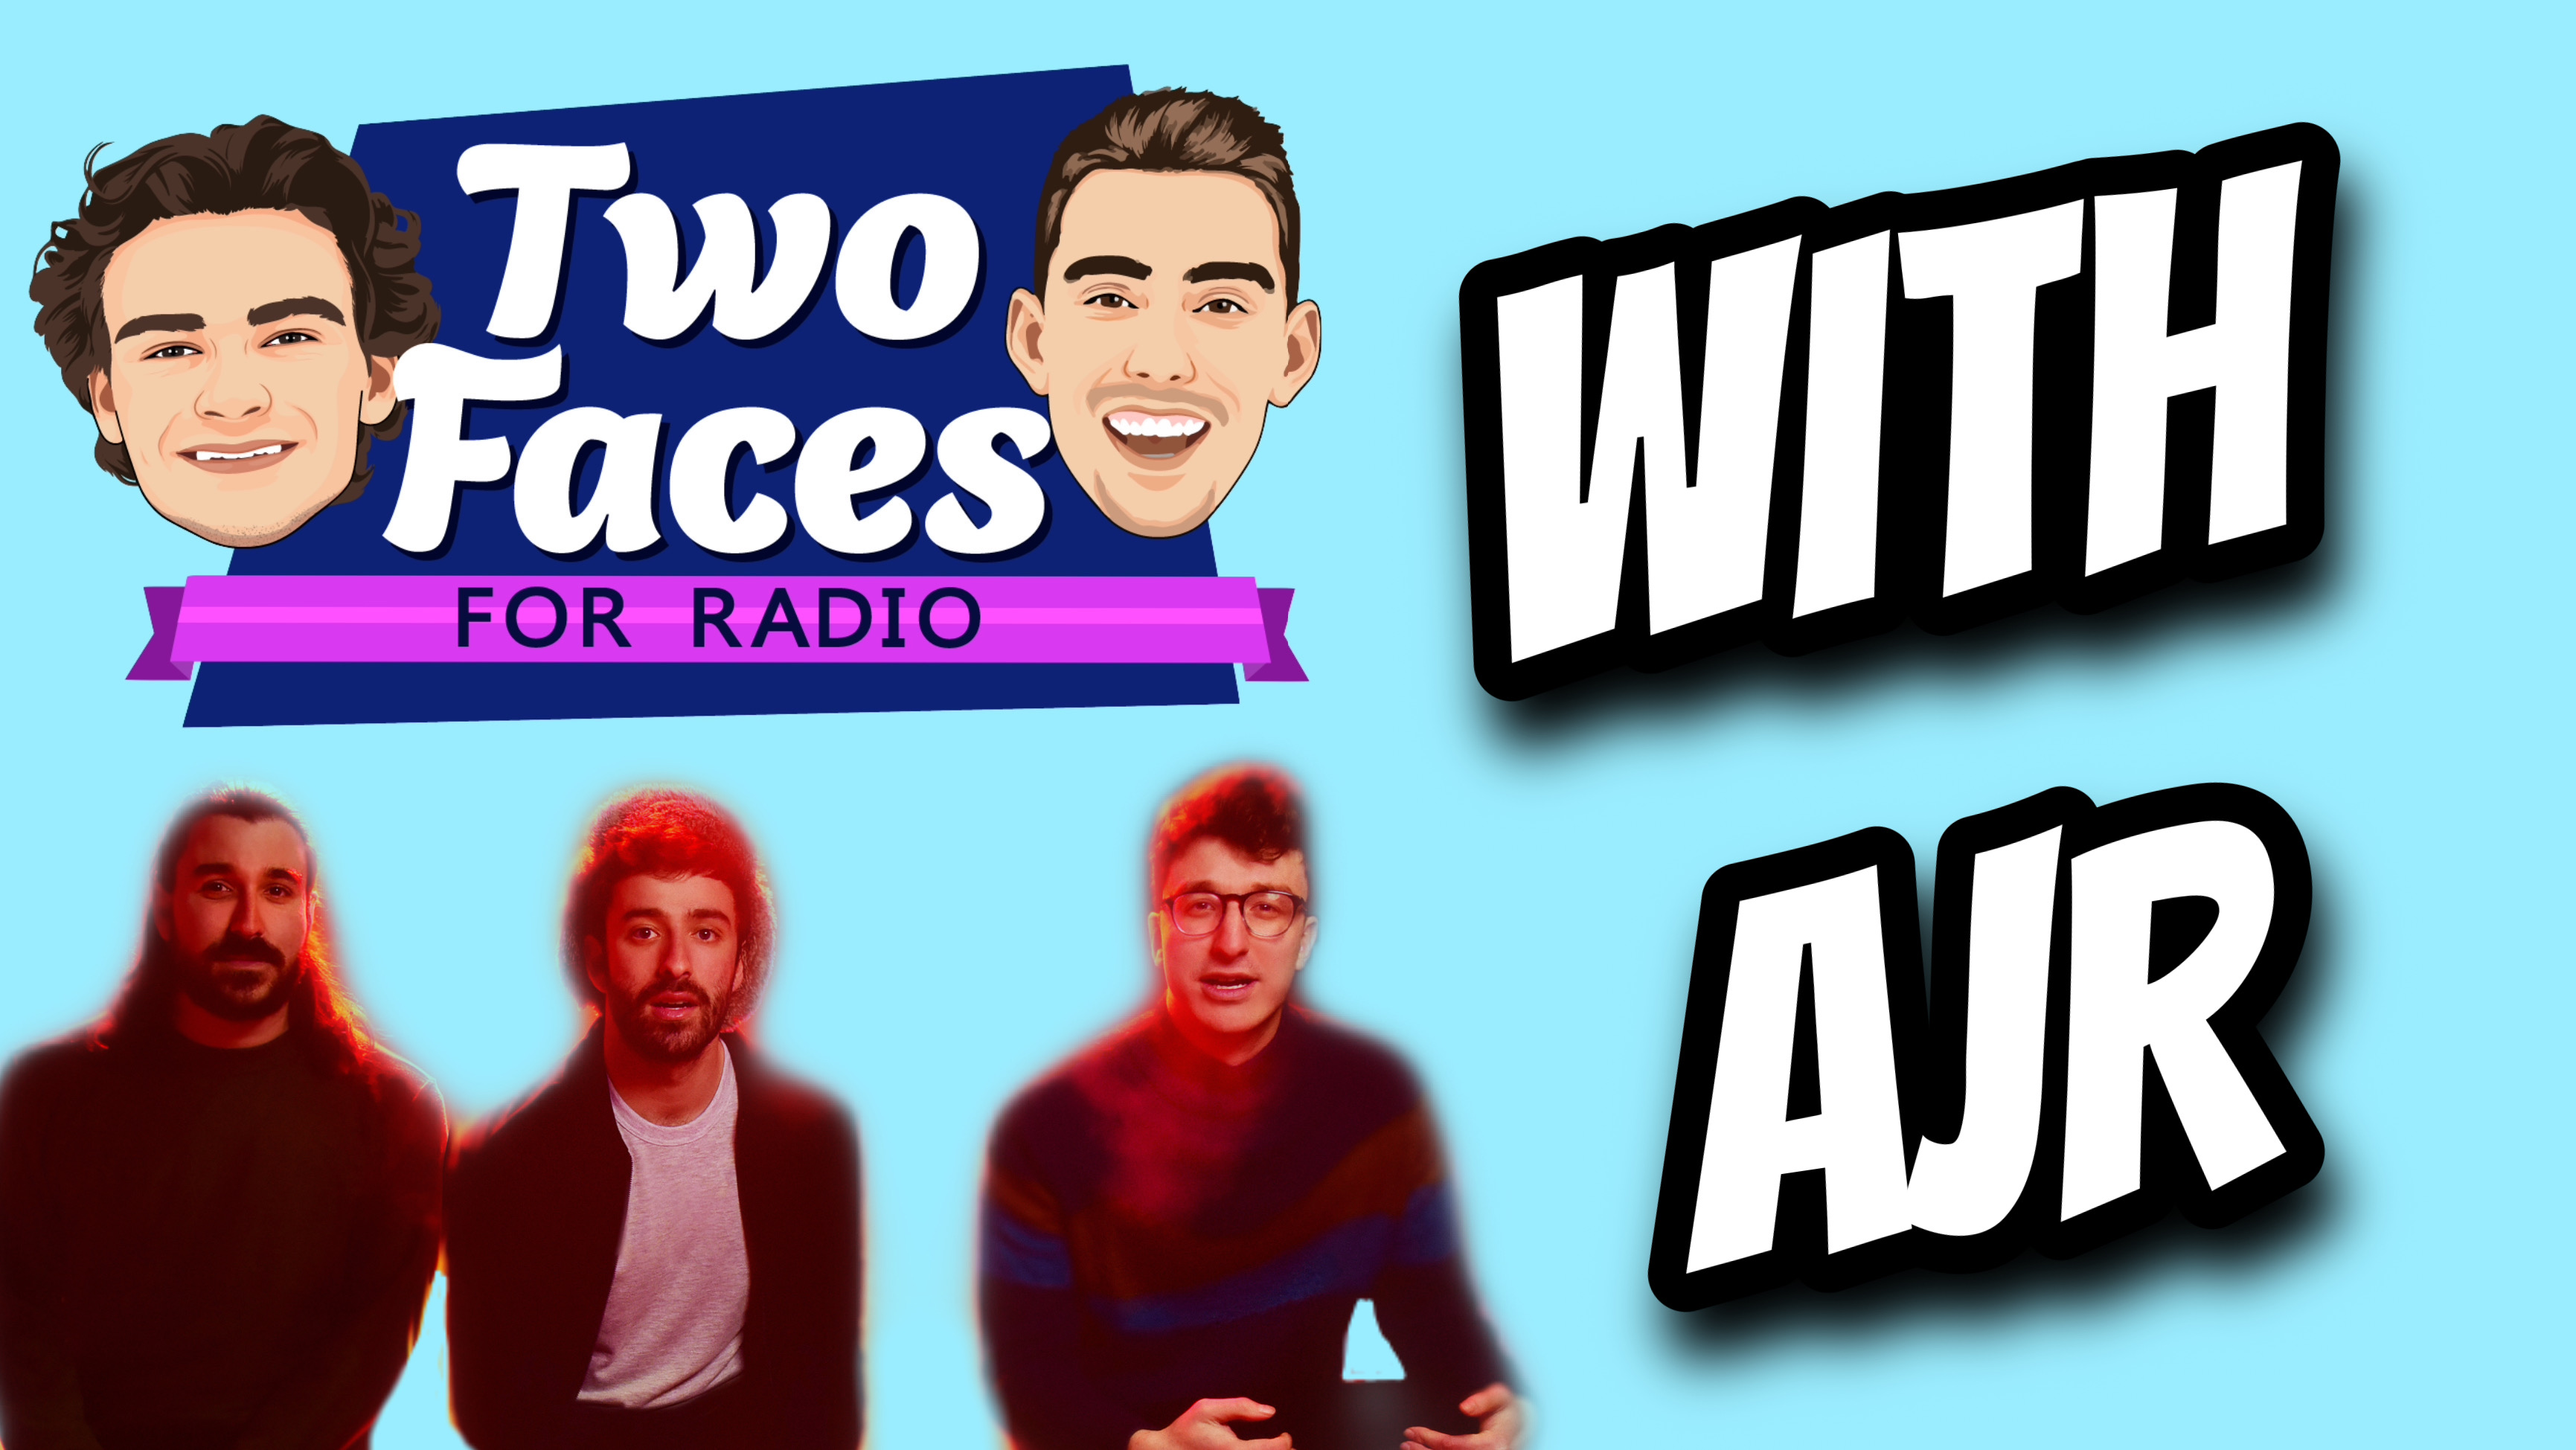 AJR Joins The Two Faces For Radio Podcast [WATCH]